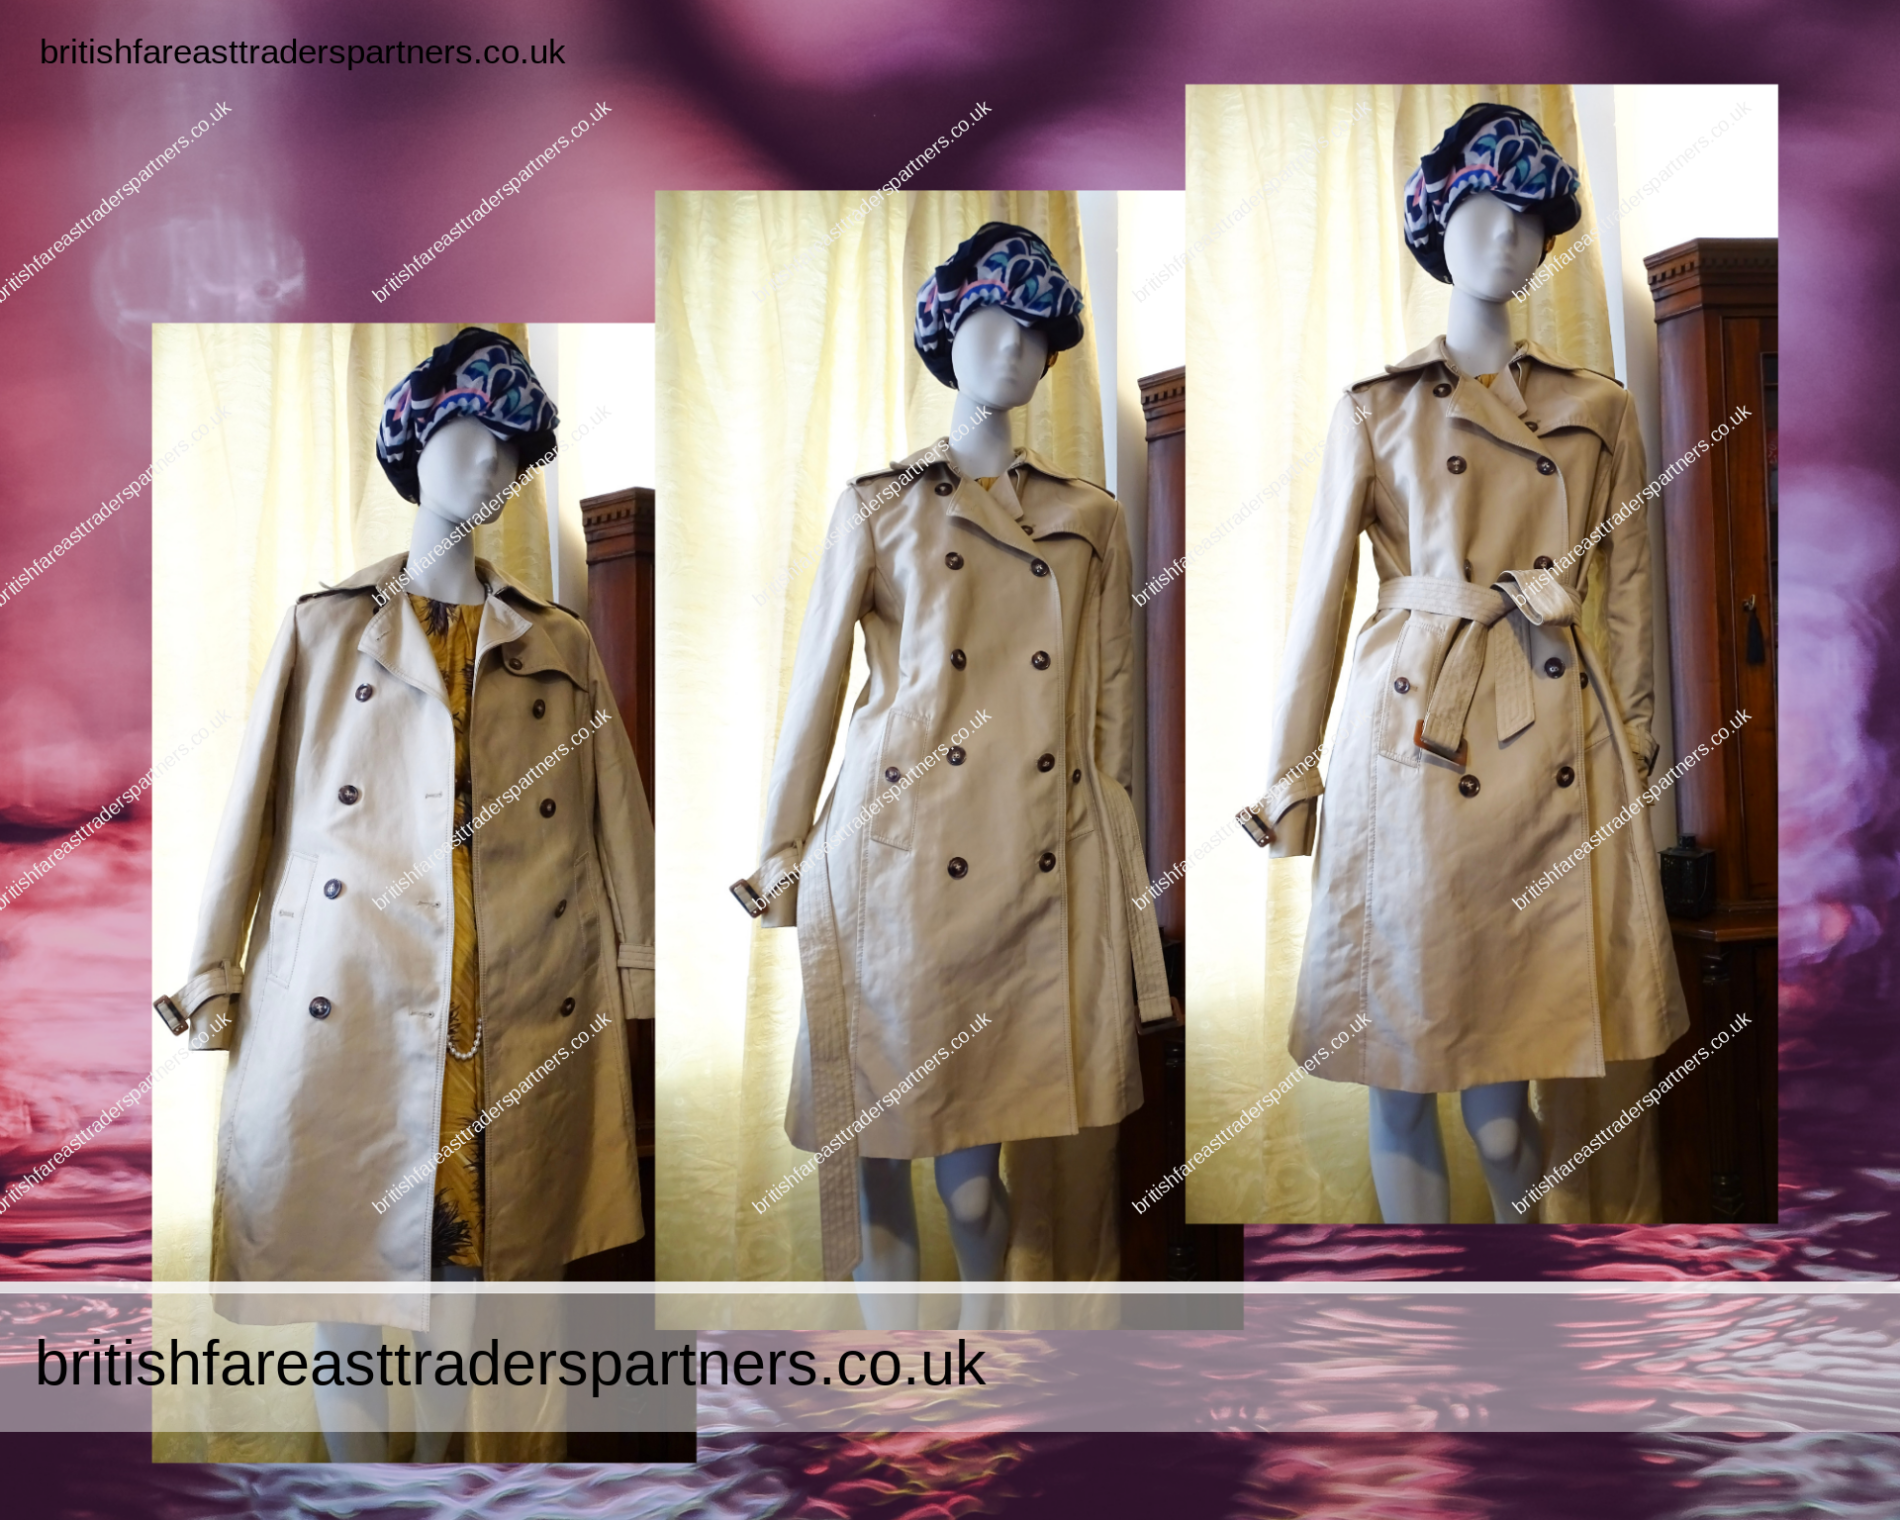 Ladies Women’s H&M Beige Double Breasted Smart Belted Mac Trench Coat UK 12 / EUR 38 / US 8/ CA 8 / CN 165/ 88A / MX 8 VGC